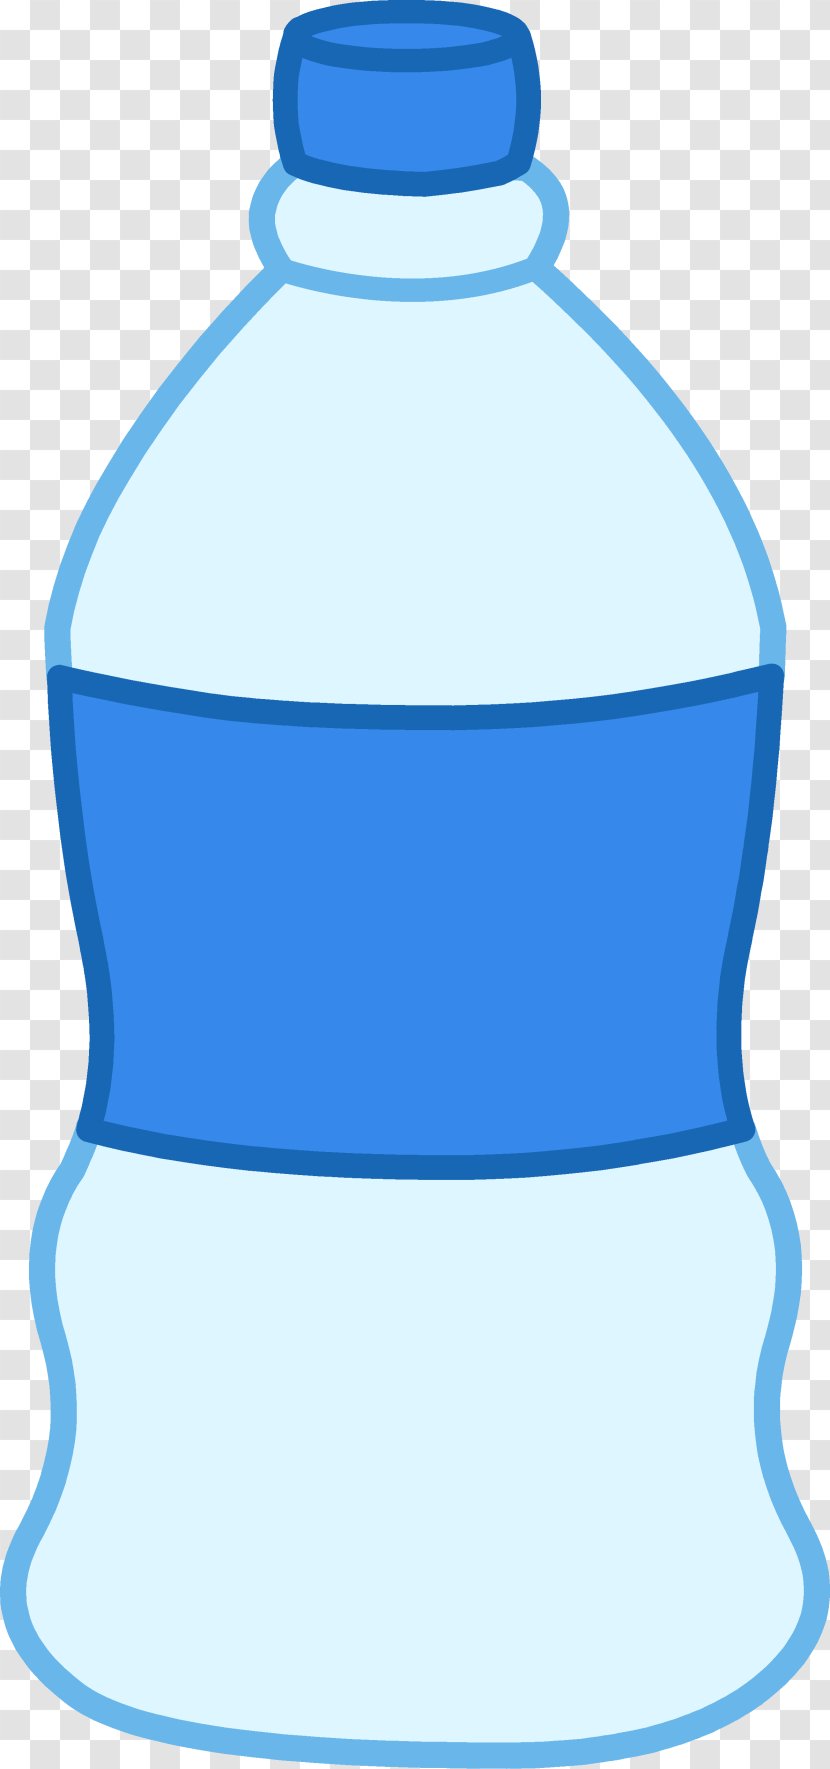 Water Bottles Bottled Clip Art - Container - Cave Cliparts Transparent PNG